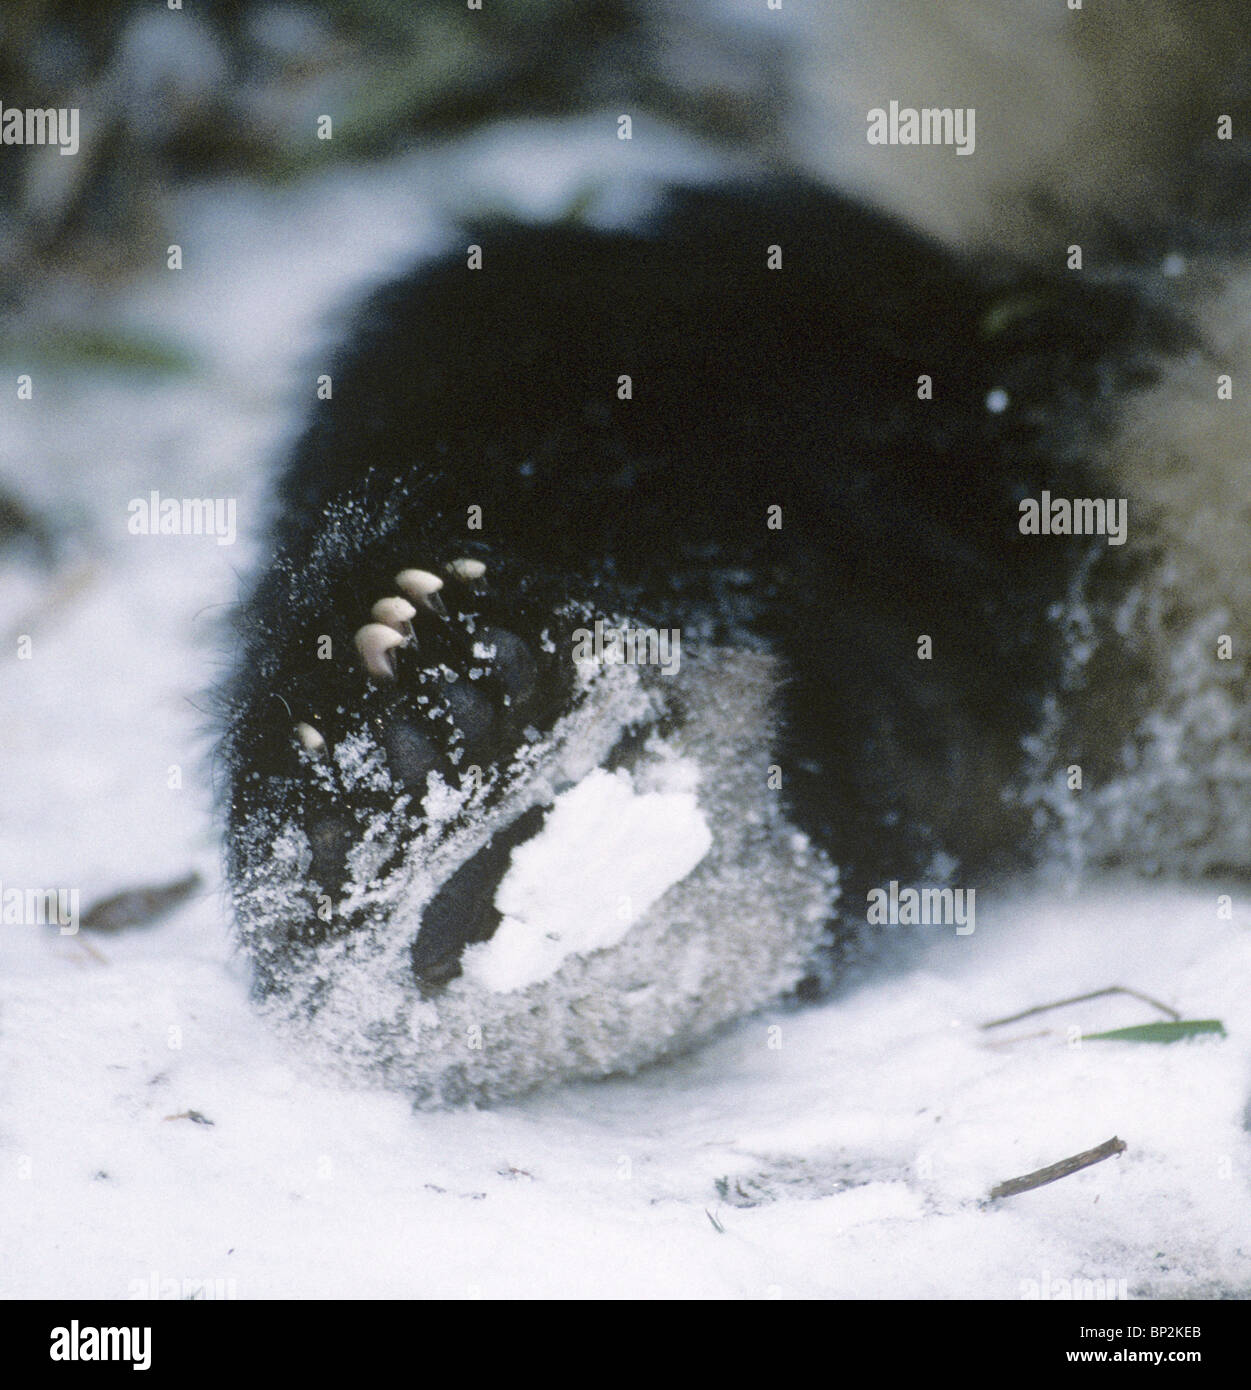 Underside of giant panda hind paw covered in snow in winter, Wolong, China Stock Photo